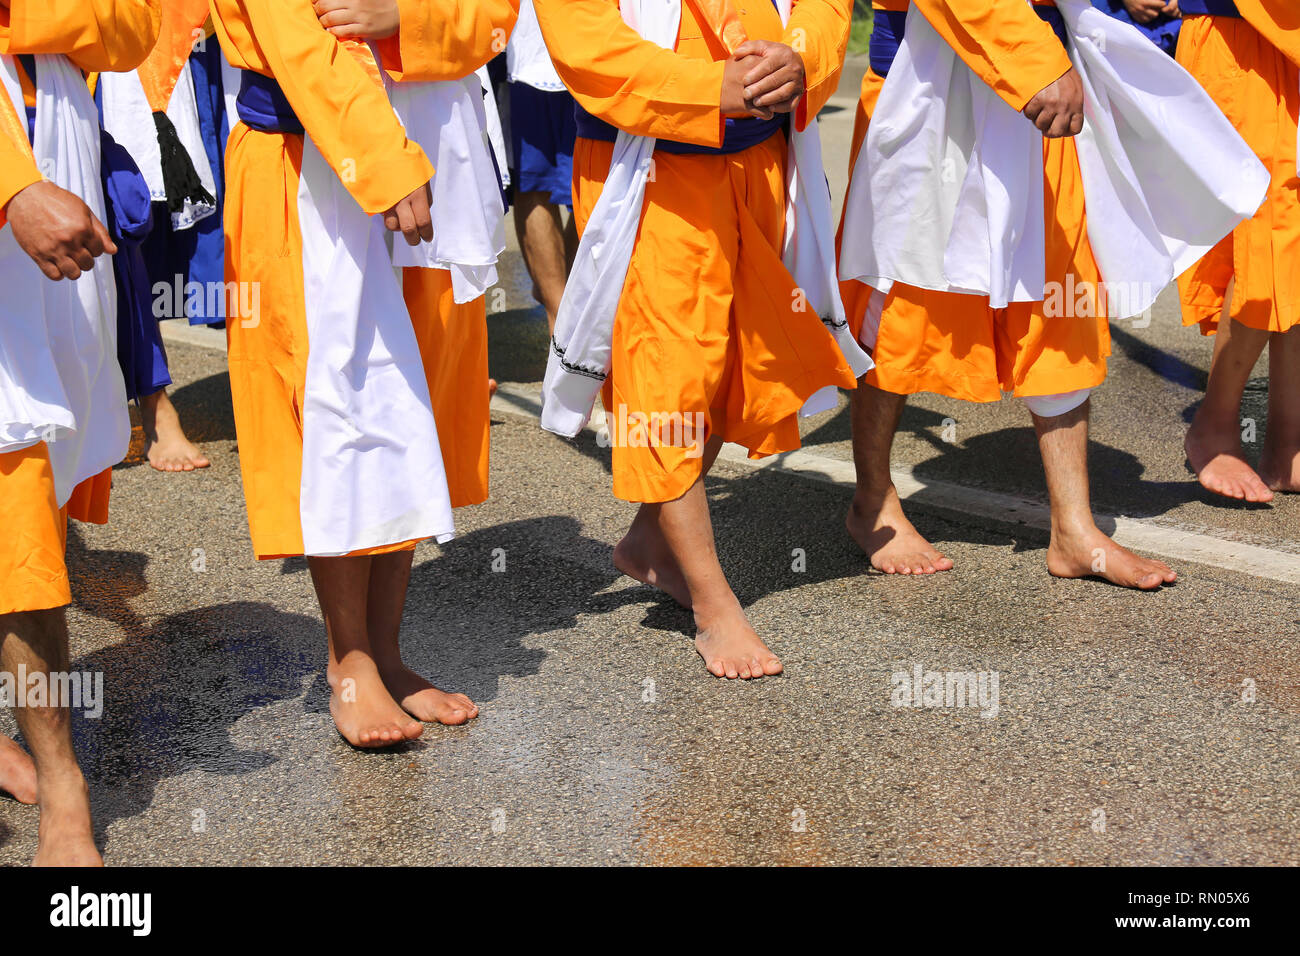 barefoot Sikh religion men during the parade in the streets of the city with orange dresses Stock Photo